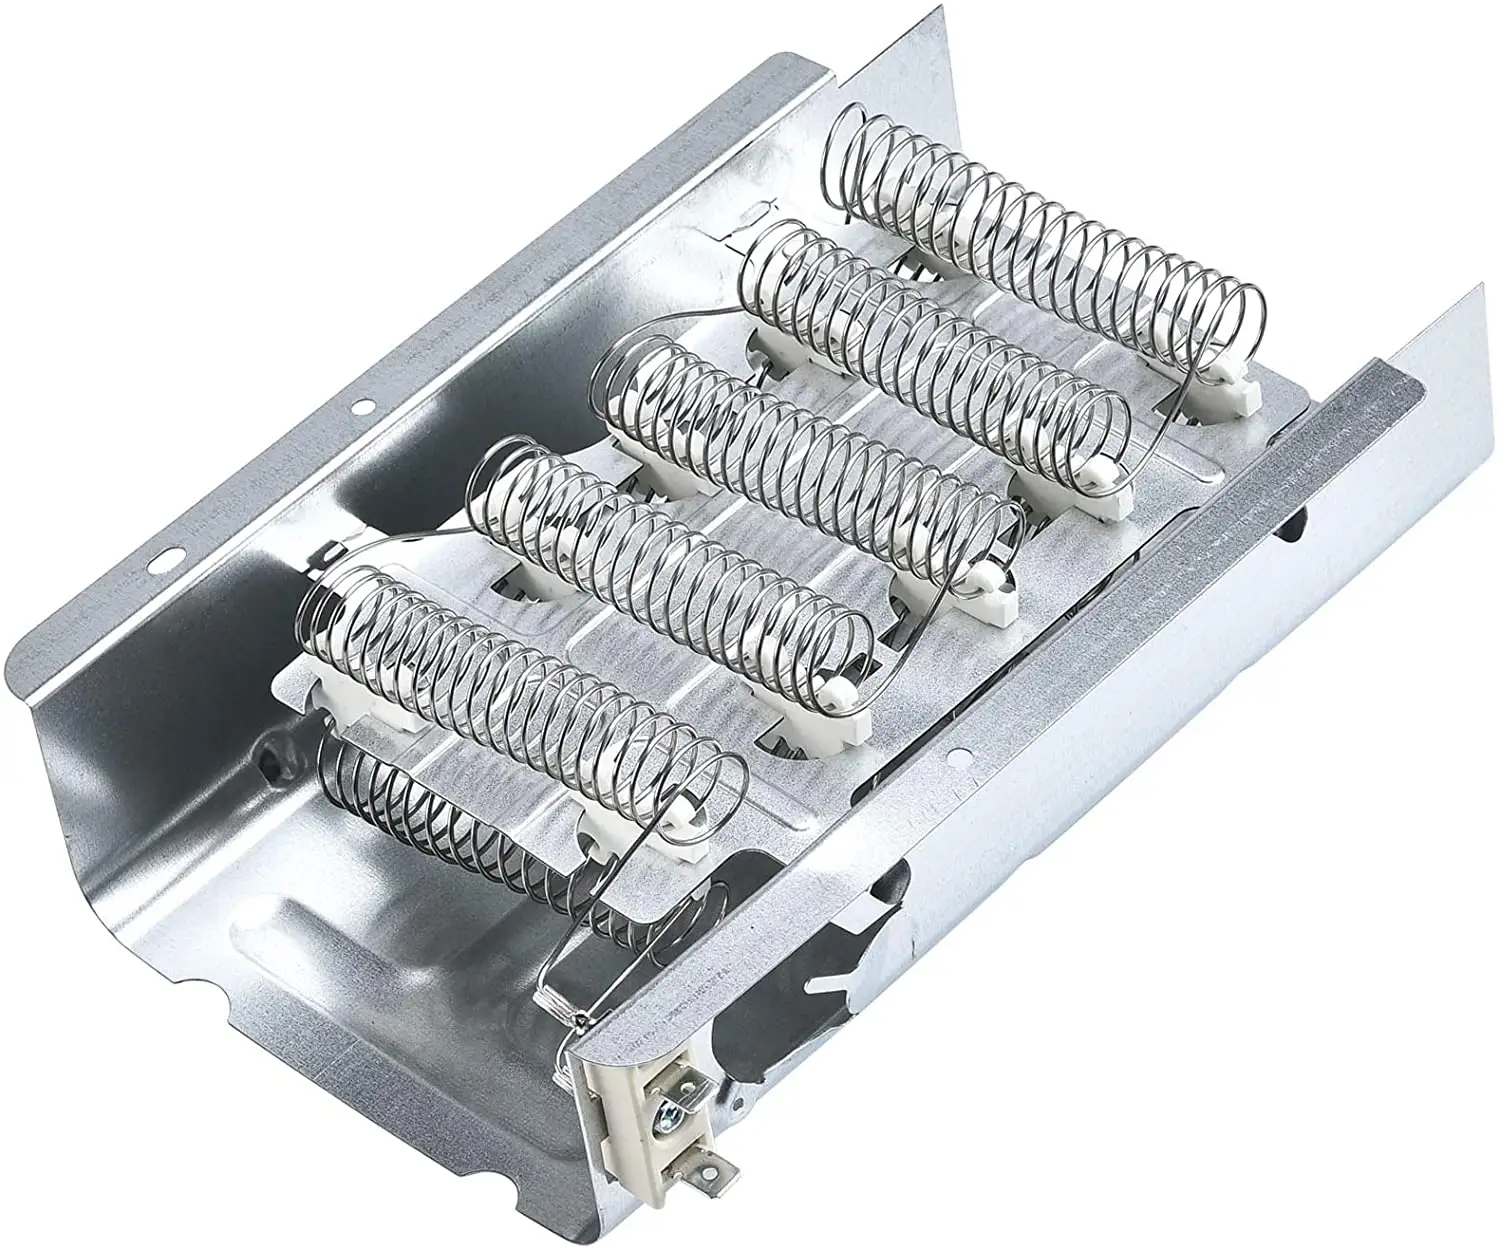 279838 Dryer Heating Element 240V 5400W Compatible with Whirlpool Dryers - Replaces AP3094254  279837  2438 